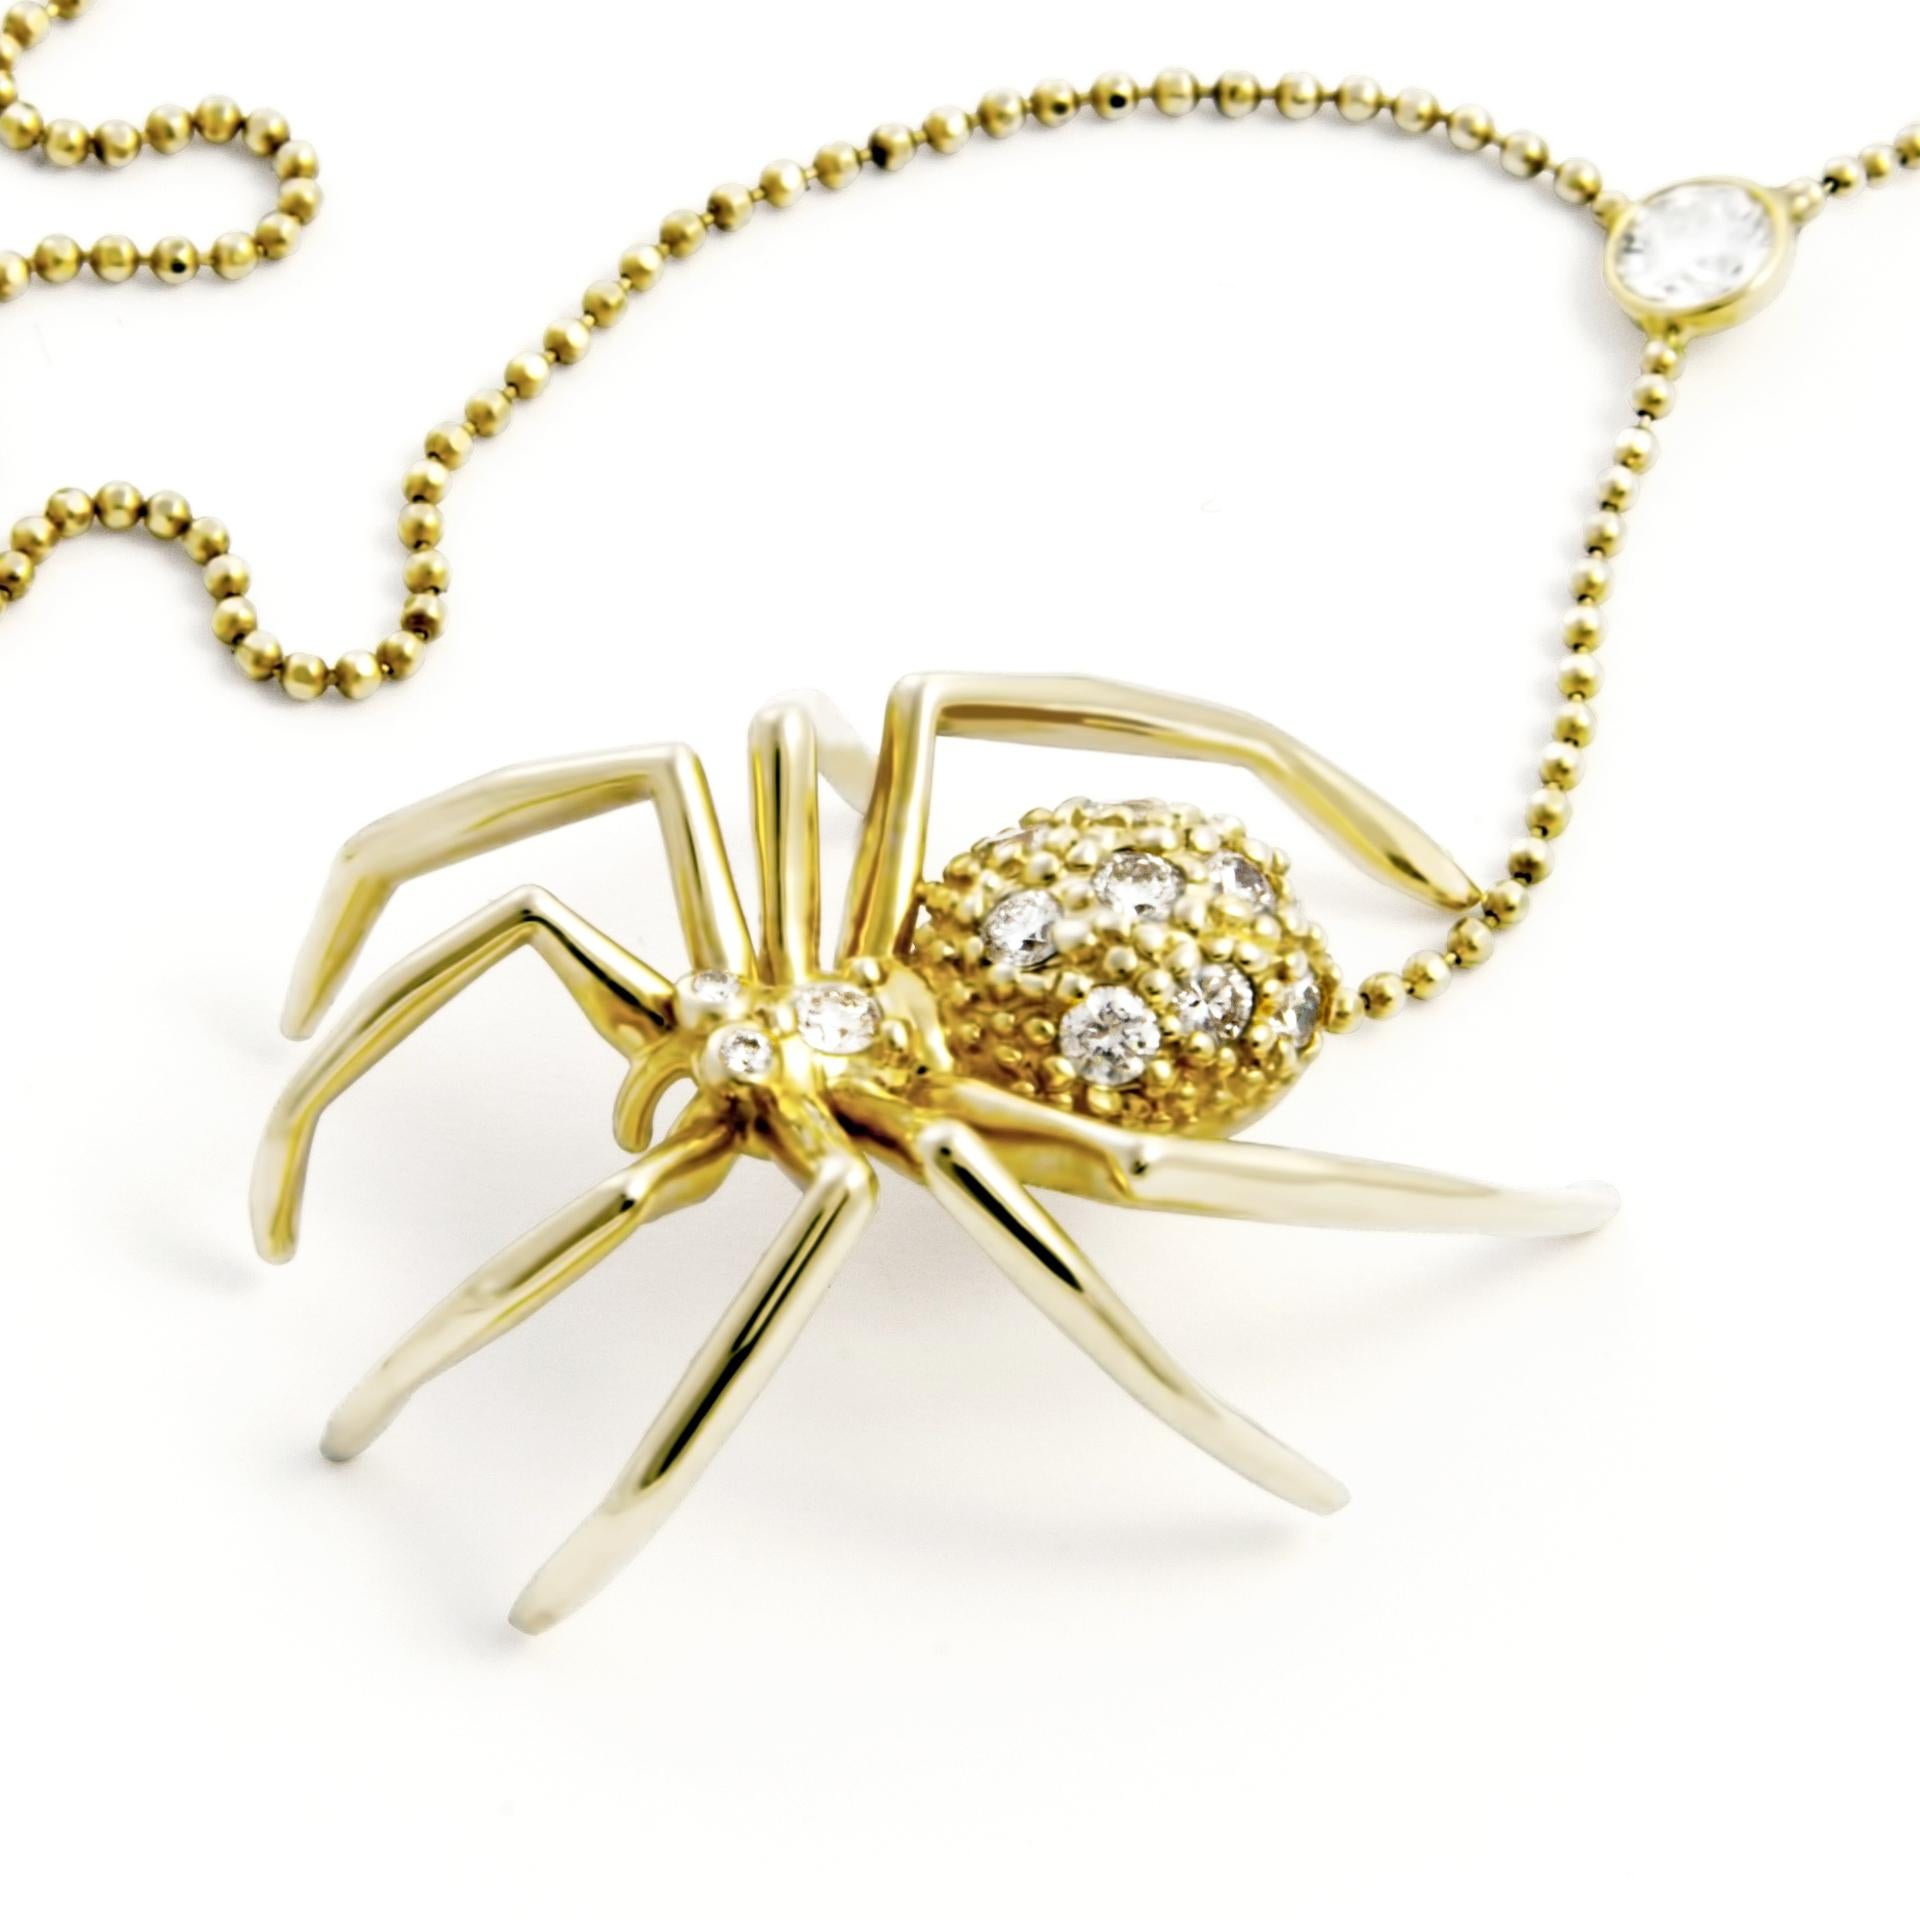 Experience the allure of the extraordinary Large Spider Lariat Necklace in Yellow Gold Plated with White Sapphires, a mesmerizing jewel that embodies fearless elegance. This daring piece, which few will dare to wear, allows you to embrace the